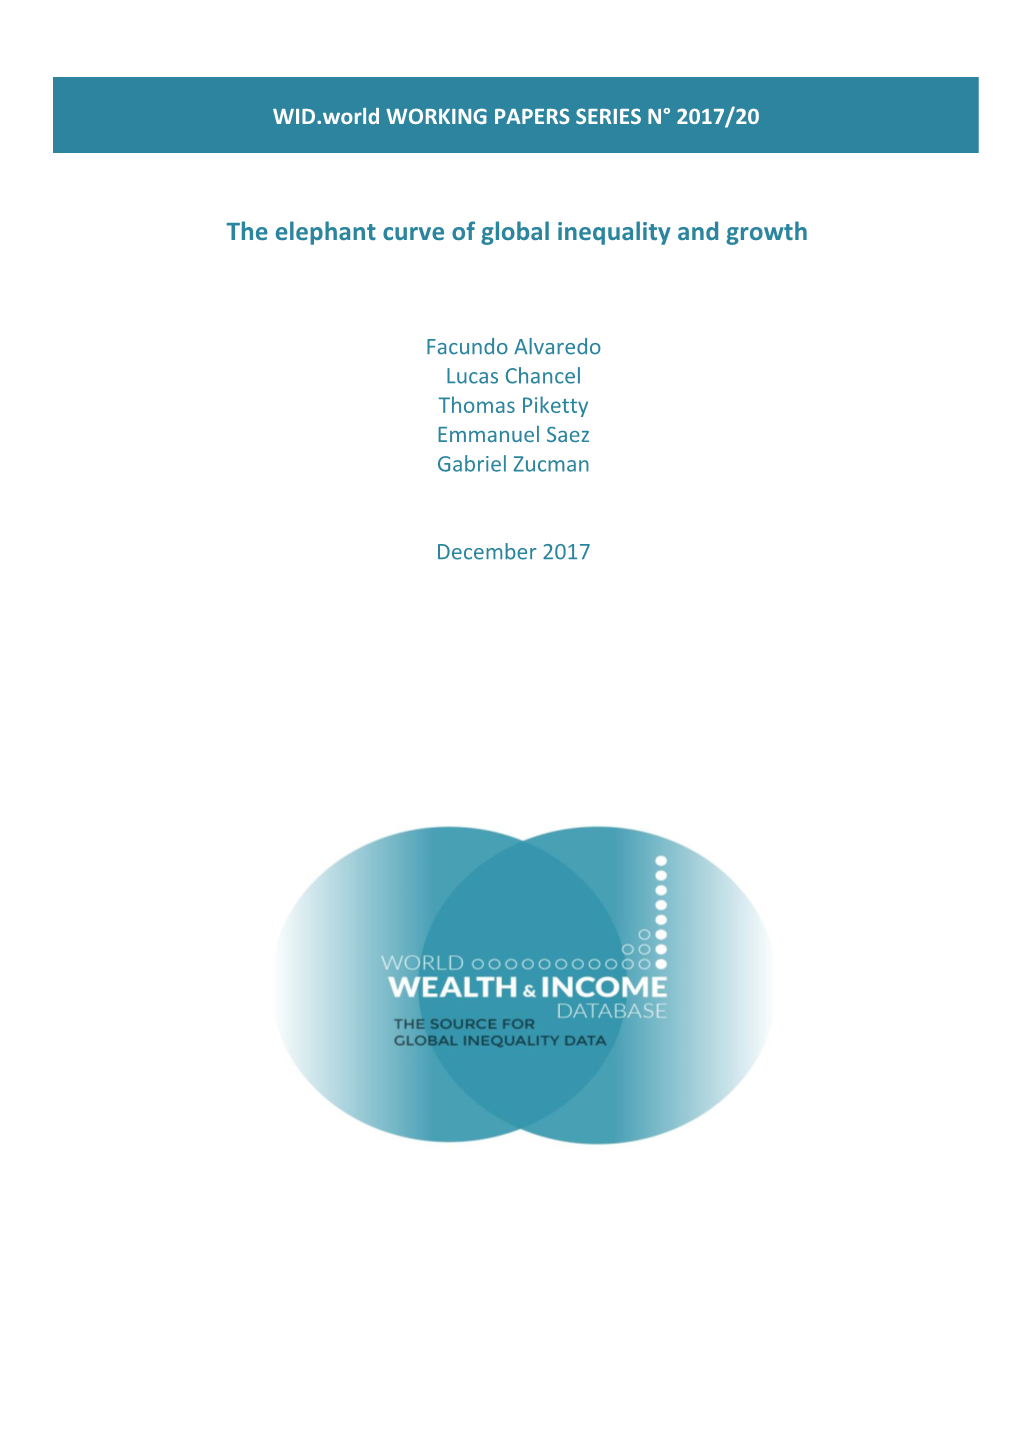 “The Elephant Curve of Global Inequality and Growth”, WID.World